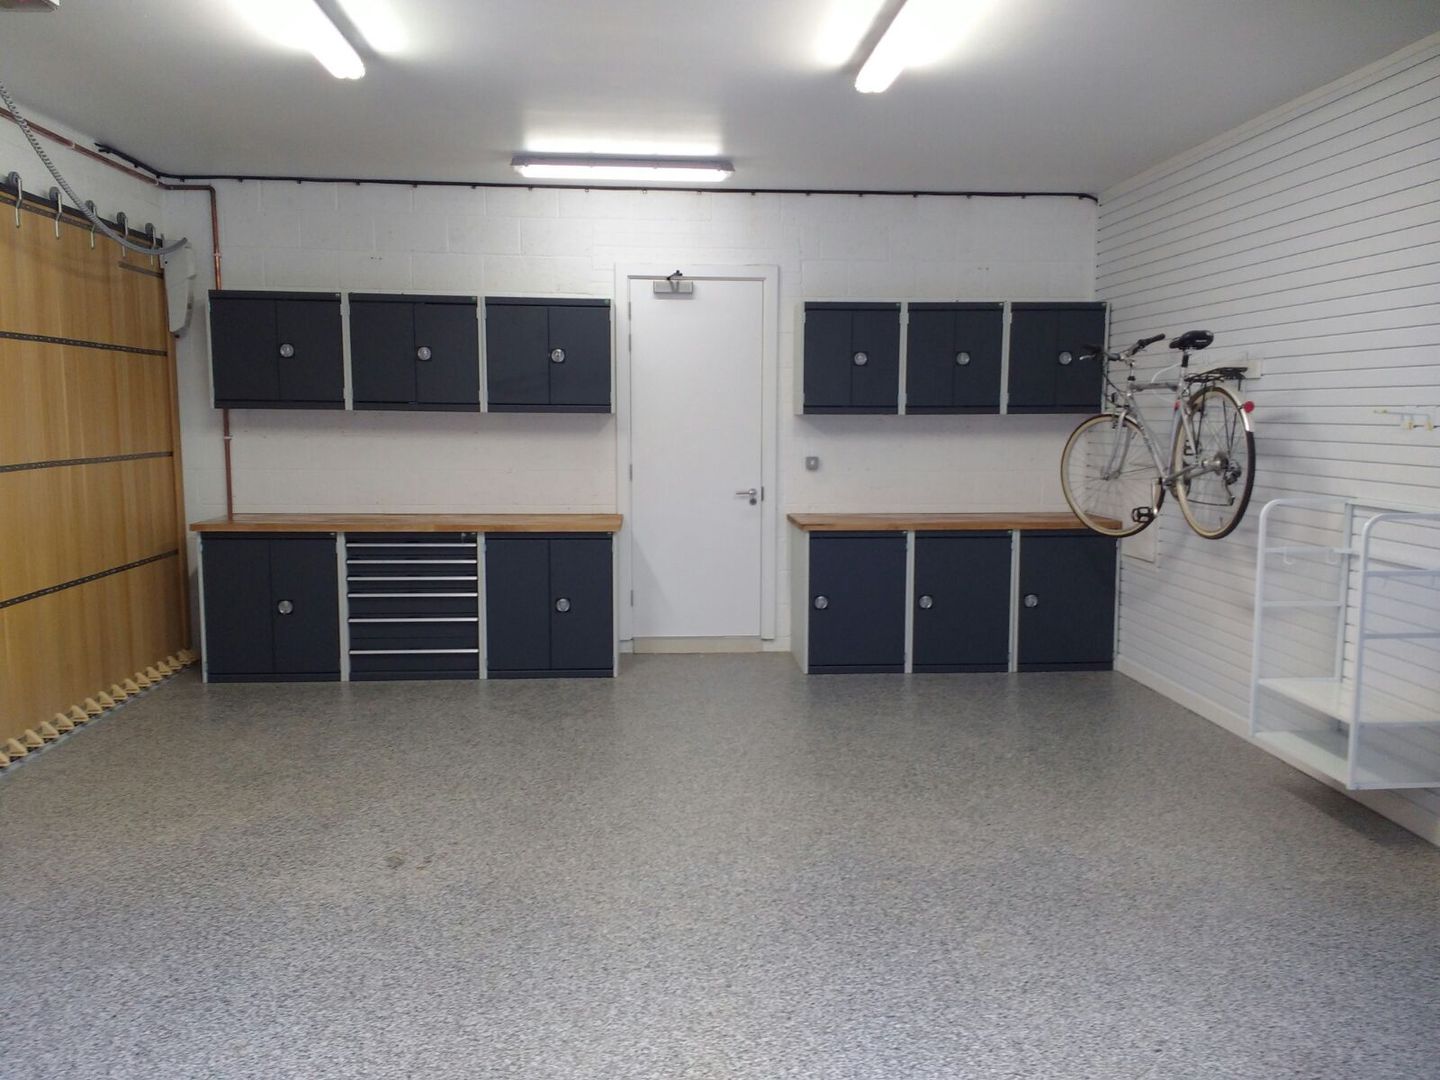 Resin Floor, Metal Cabinets and Bike Storage Galore in this lovely garage makeover in Cambridge Garageflex Nhà để xe/nhà kho phong cách hiện đại garage,built-in storage,fitted,storage,garage door,metal,cabinet,cupboard,wall paneling,floor,resin,bike